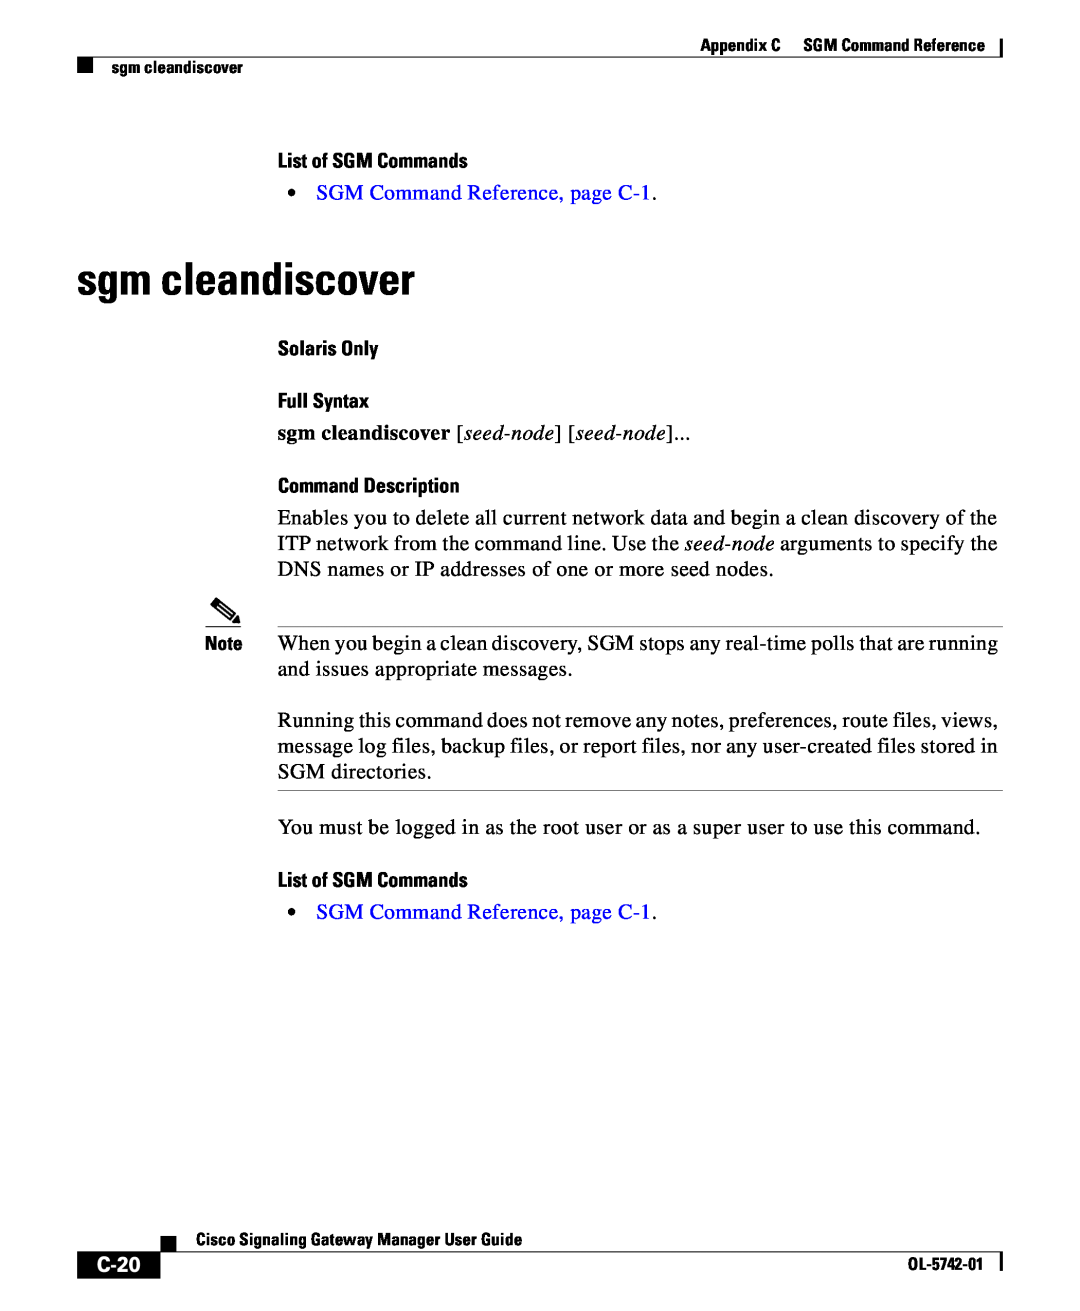 Cisco Systems OL-5742-01 appendix sgm cleandiscover, C-20, List of SGM Commands, SGM Command Reference, page C-1 